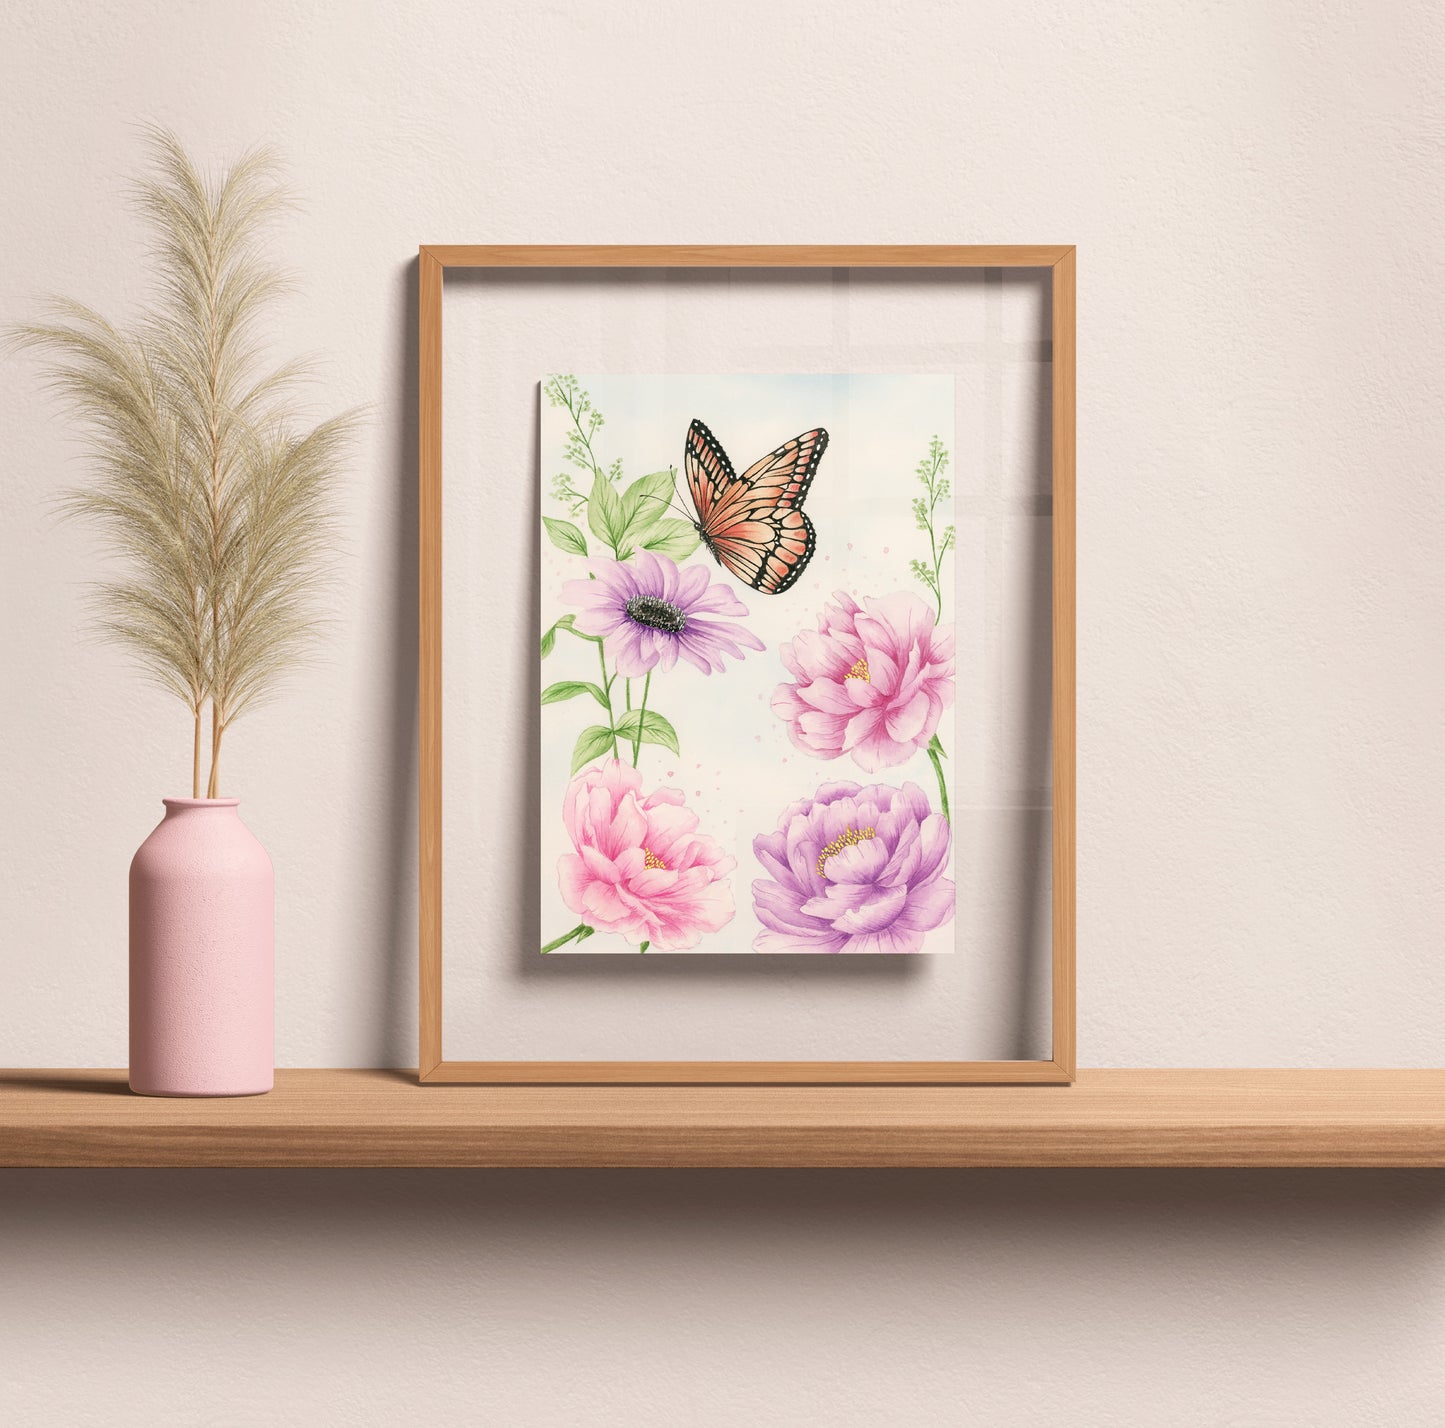 Monarch Butterfly - Original Watercolor Painting